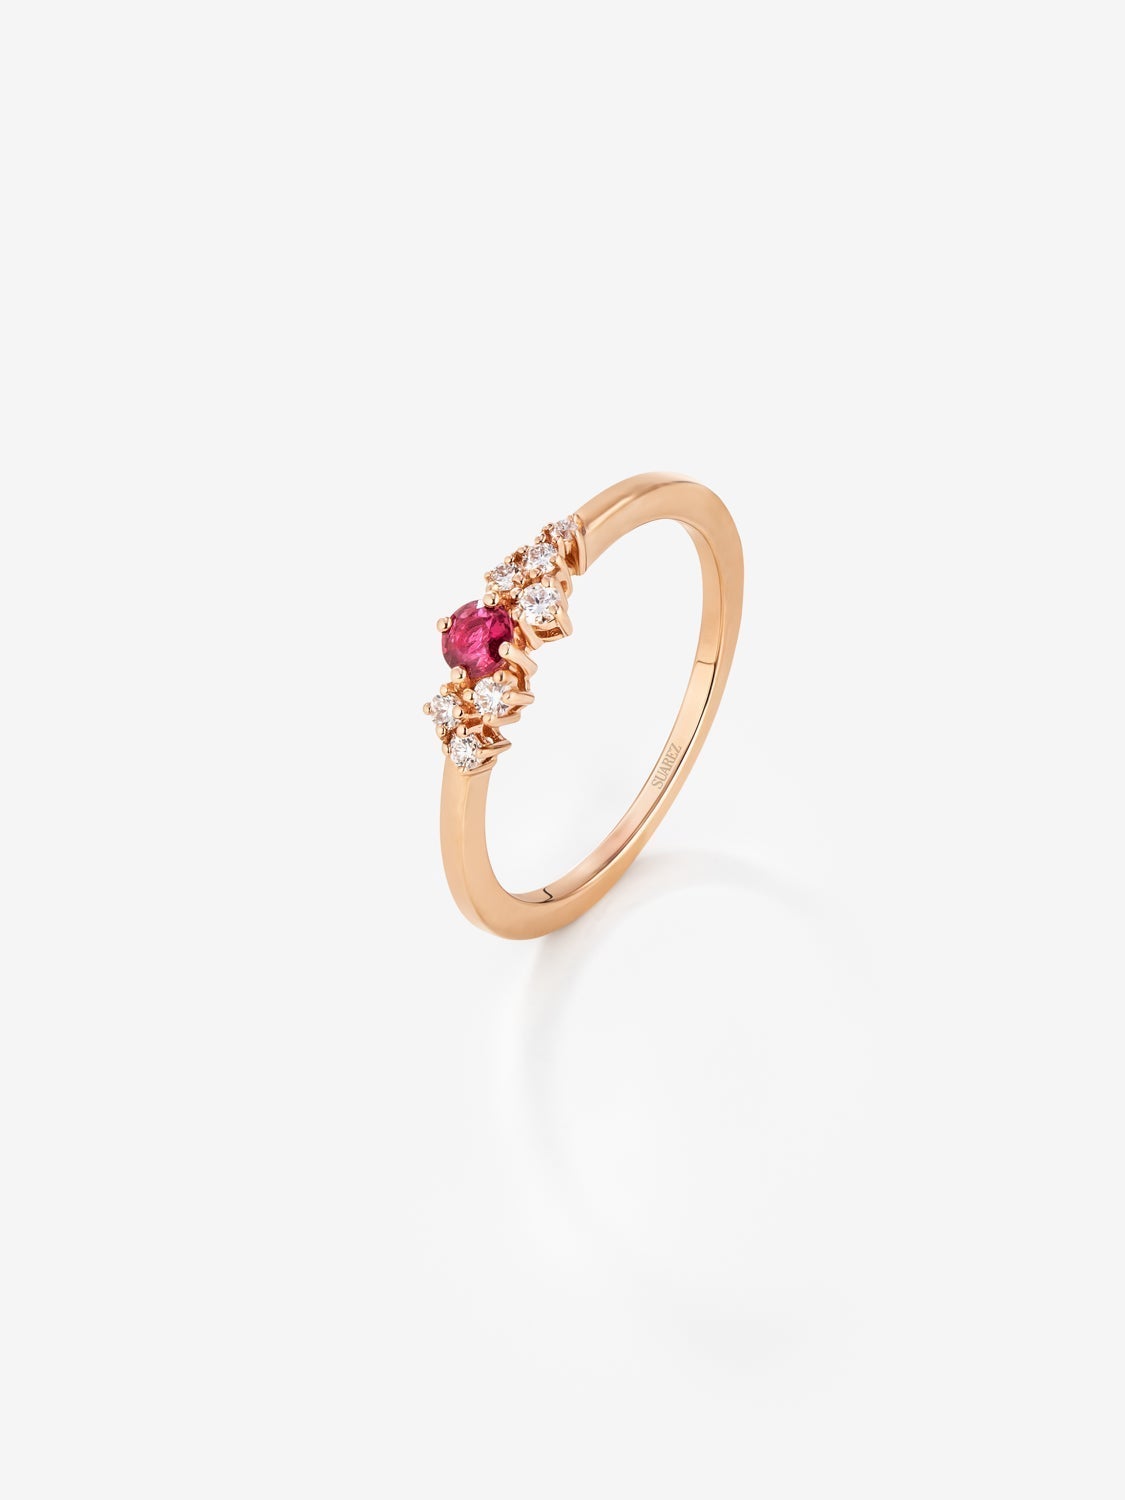 18K rose gold ring with brilliant cut ruby ​​of 0.21 cts and 7 brilliant cut diamonds with a total of 0.1 cts